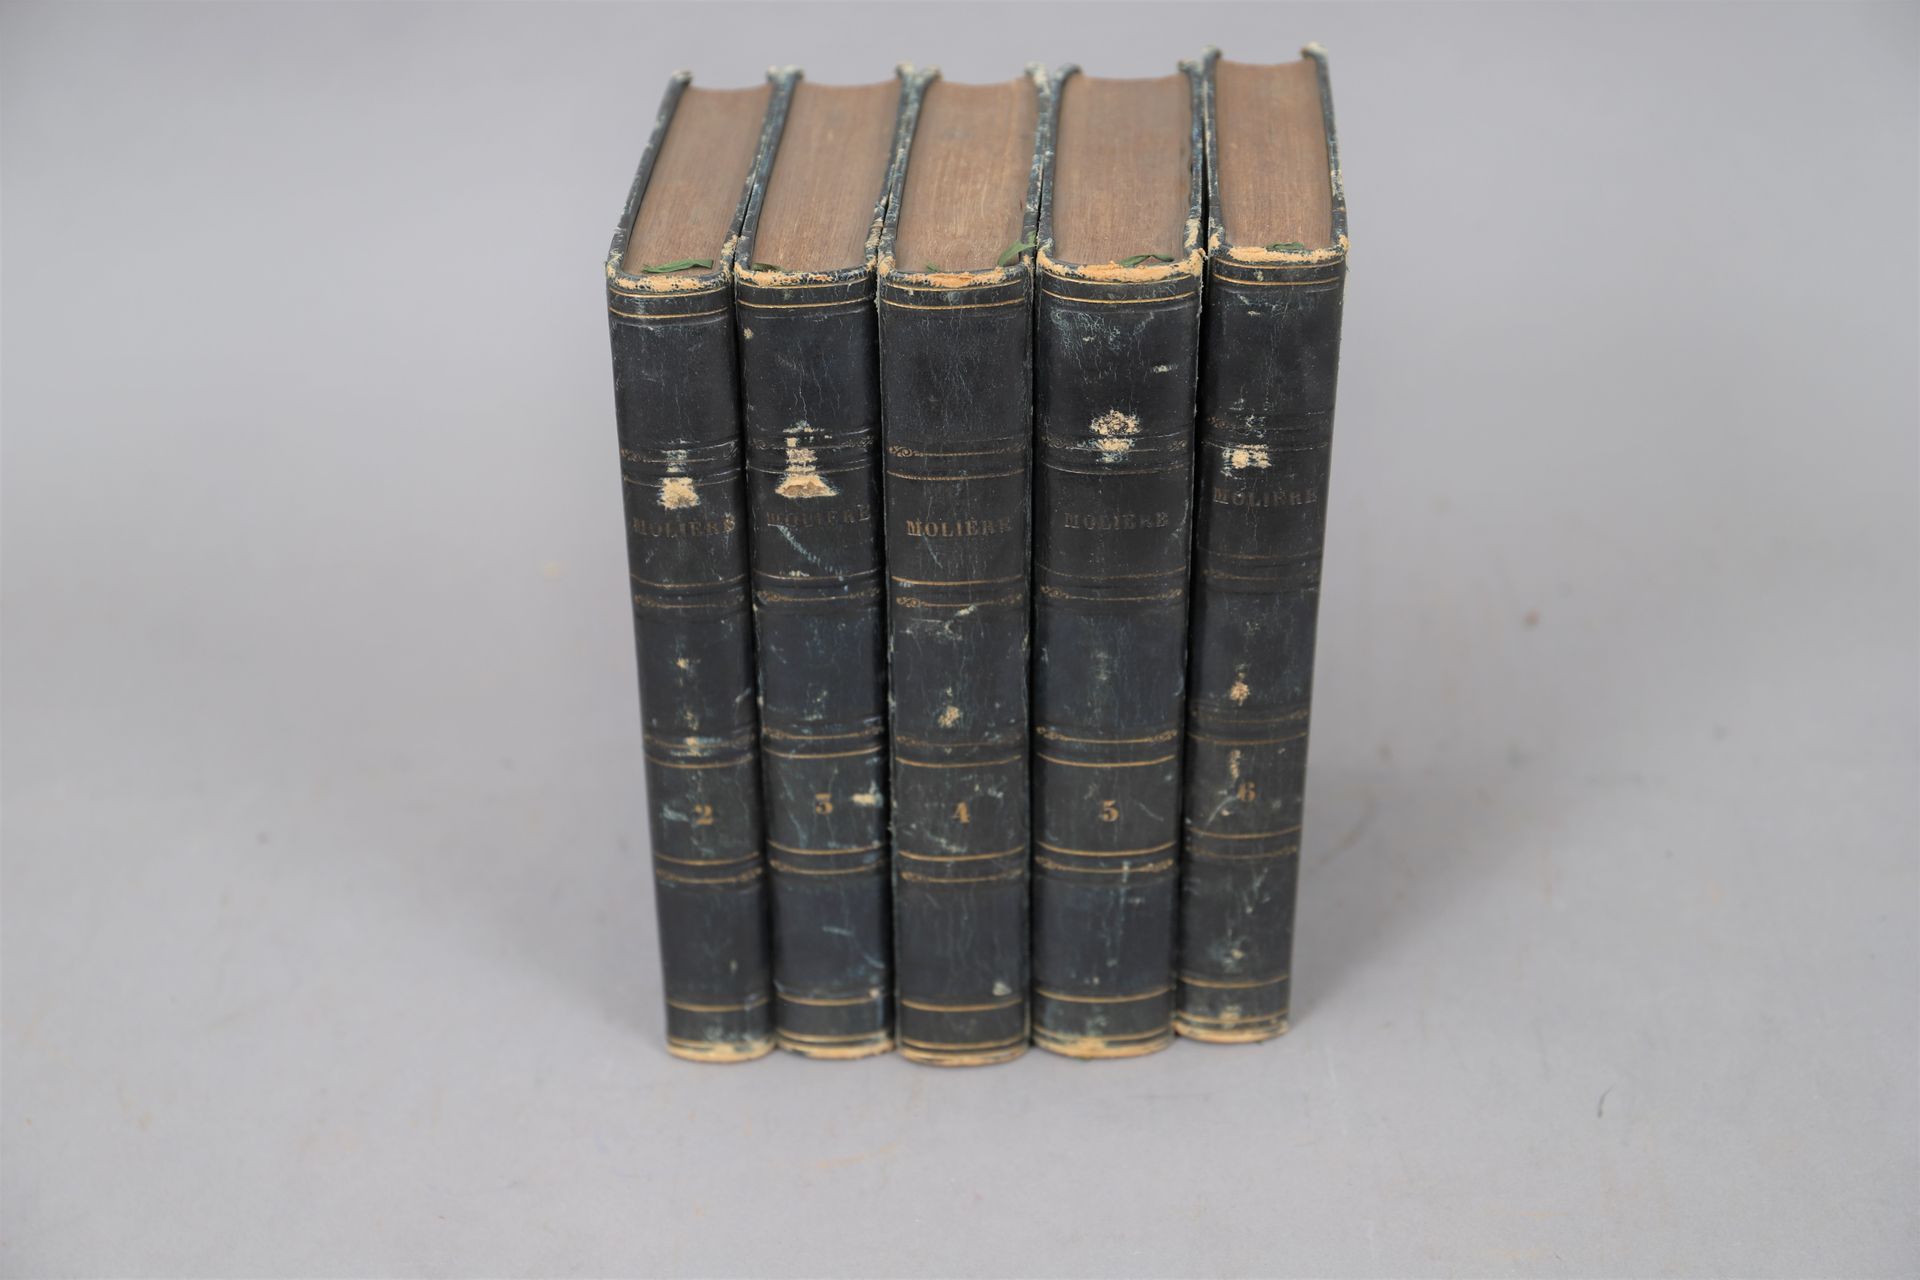 Null WORKS by MOLIERE

About 1850

5 bound volumes.